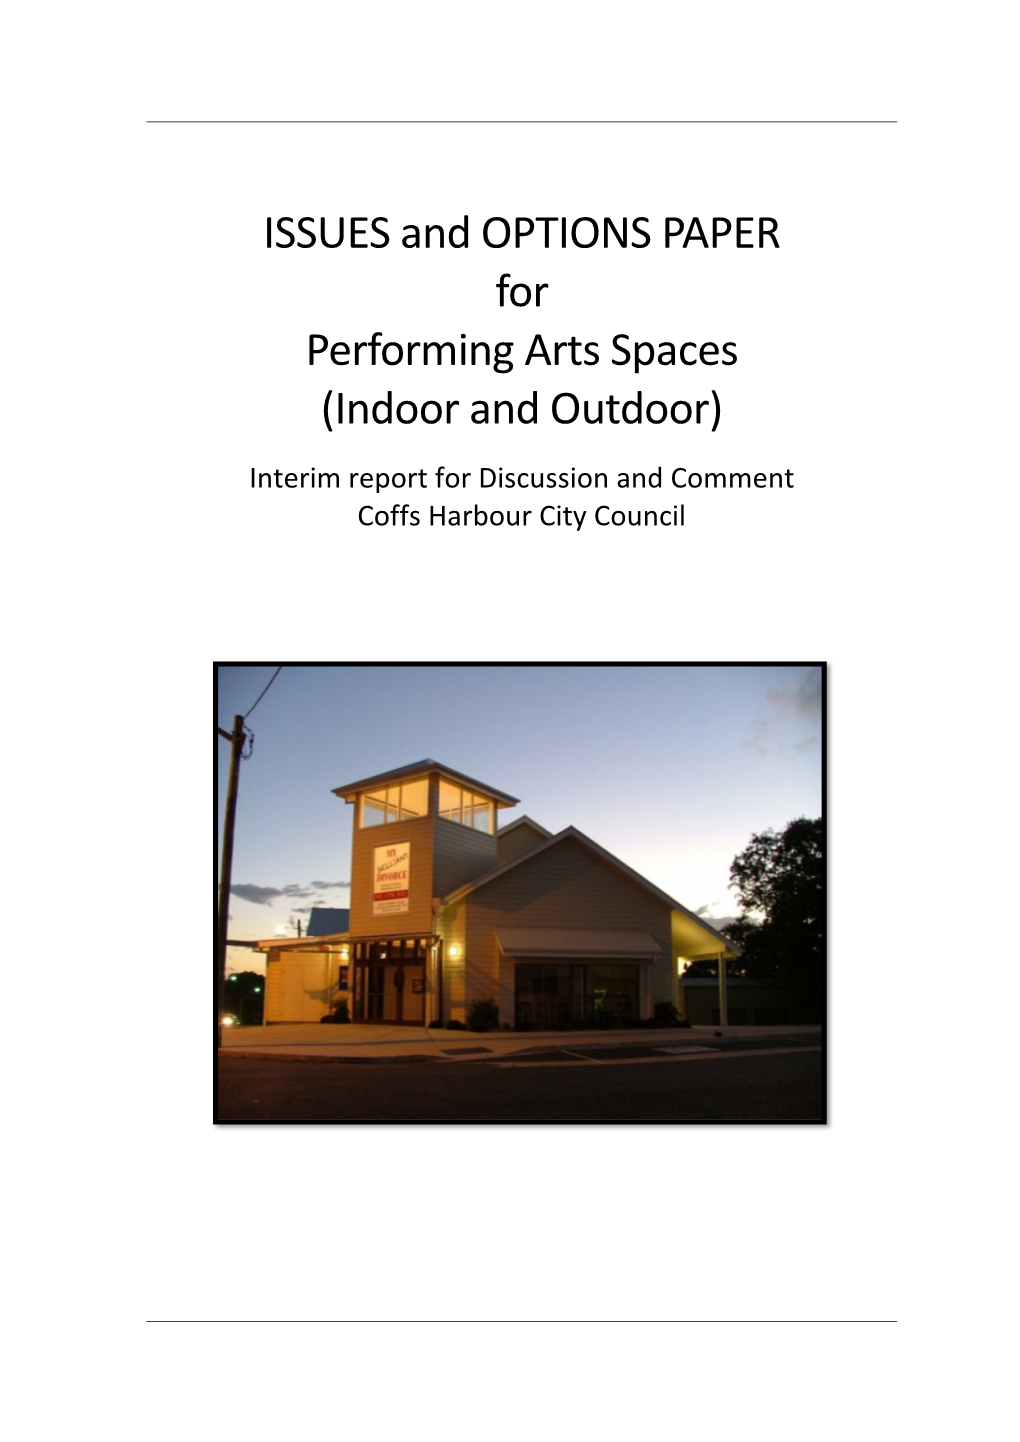 Coffs Harbour City Council Discussion Paper for the Performing Arts